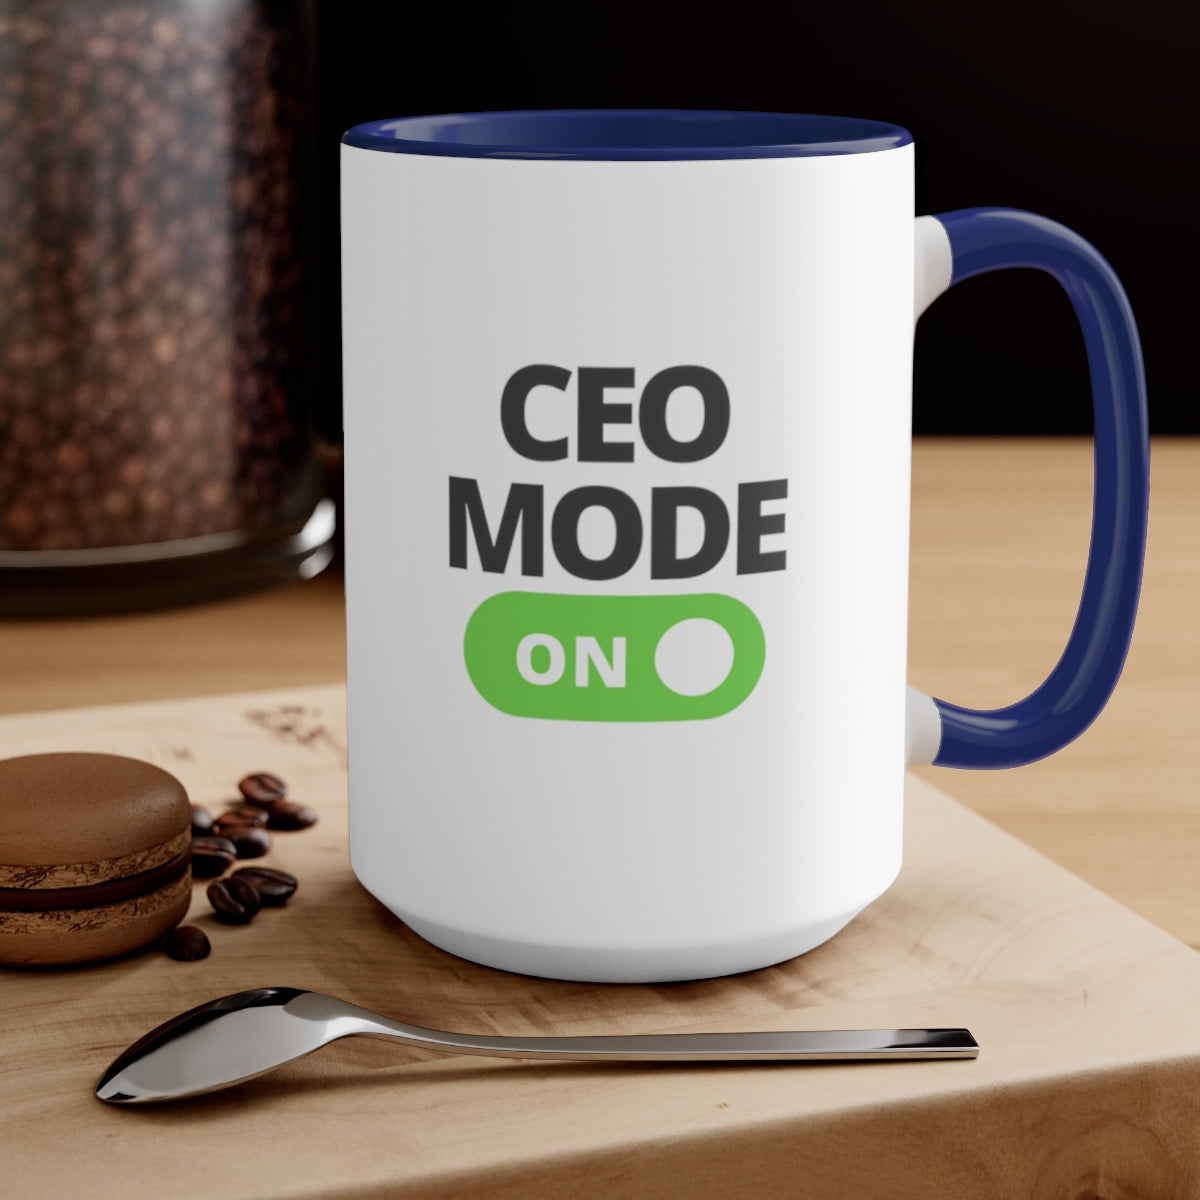 Amazing! Executive Retirement Gifts for CEO